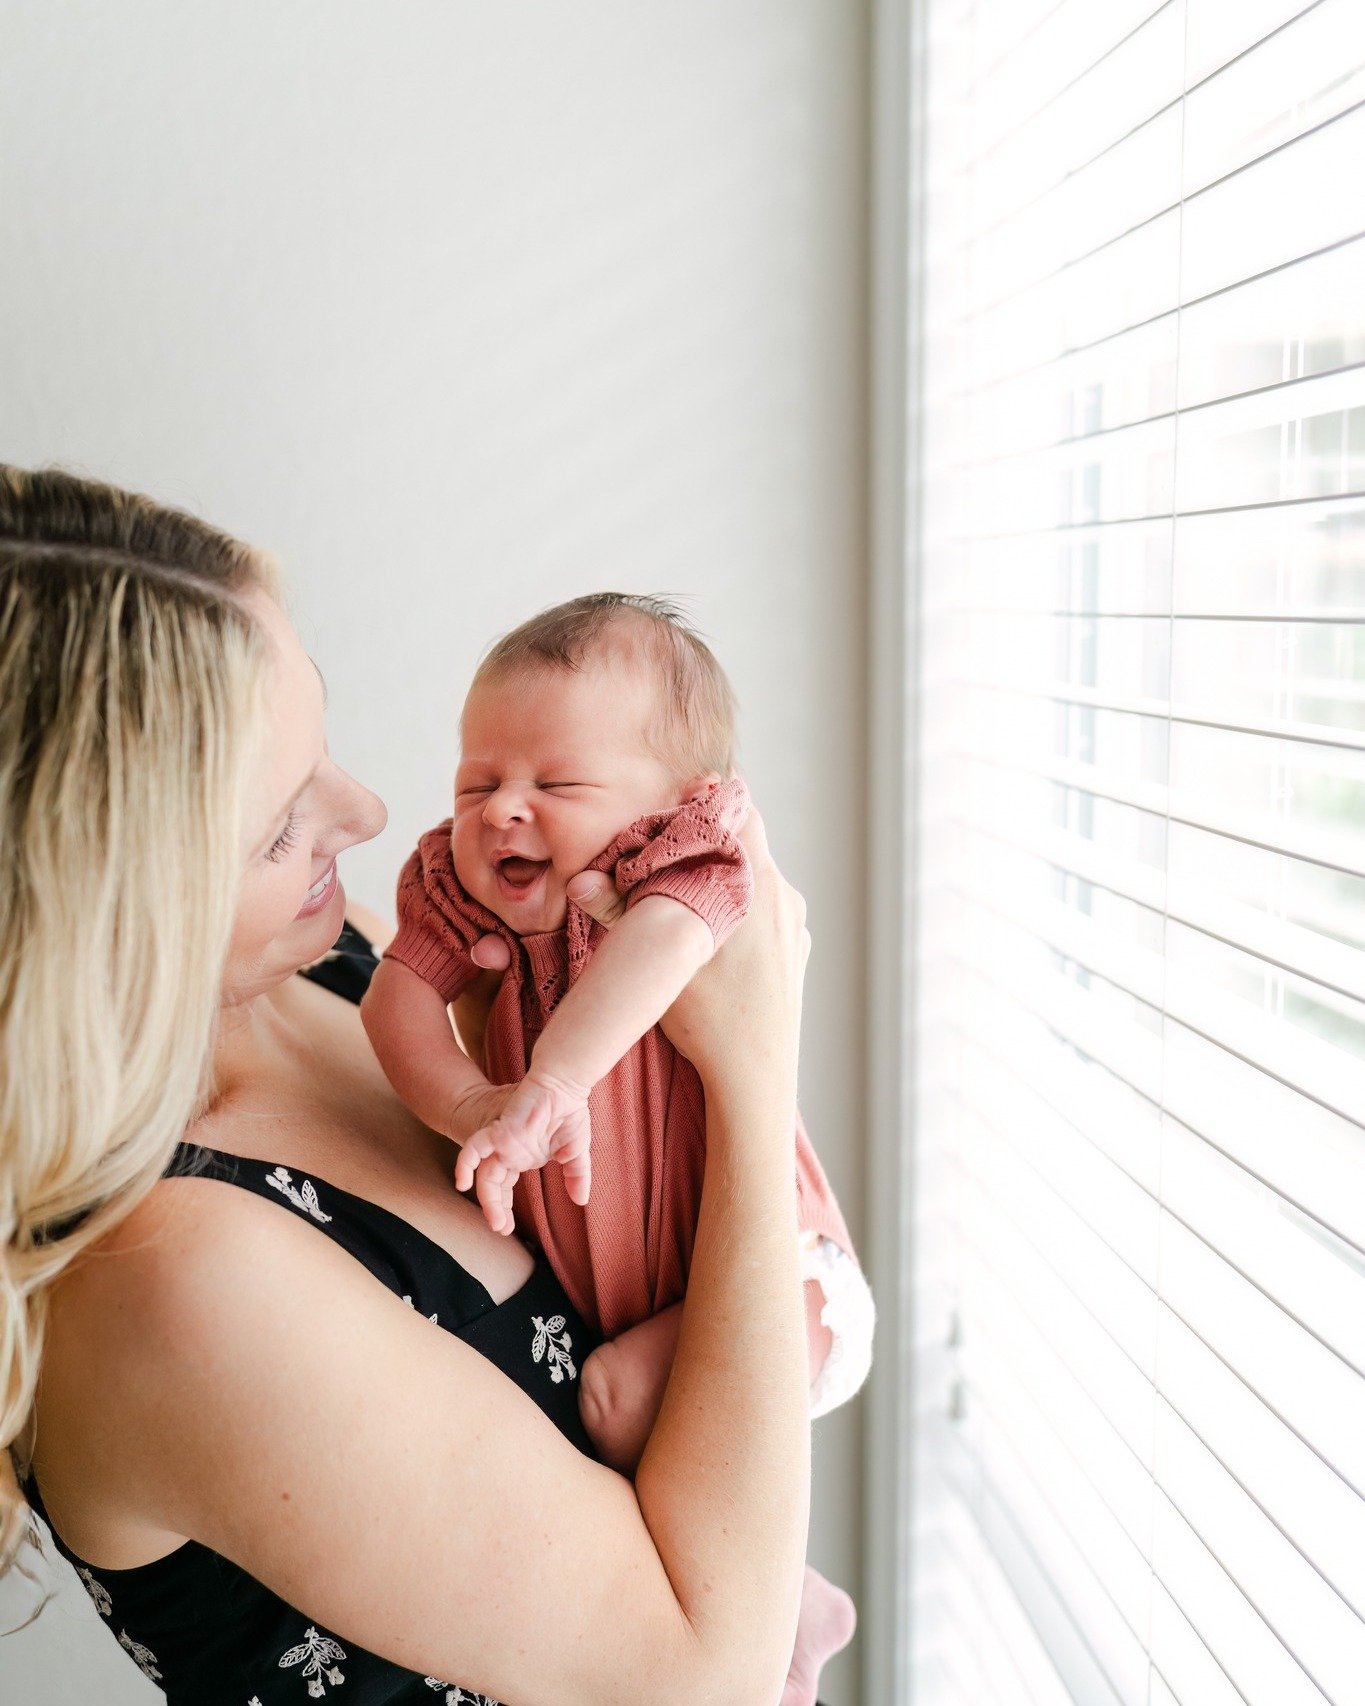 If you're considering an in-home session for your newborn photos, can I take a minute to set your mind at ease?

Your home is more than enough.
It doesn't have to be cleaned from top to bottom.
These walls shelter the people you love most on the plan